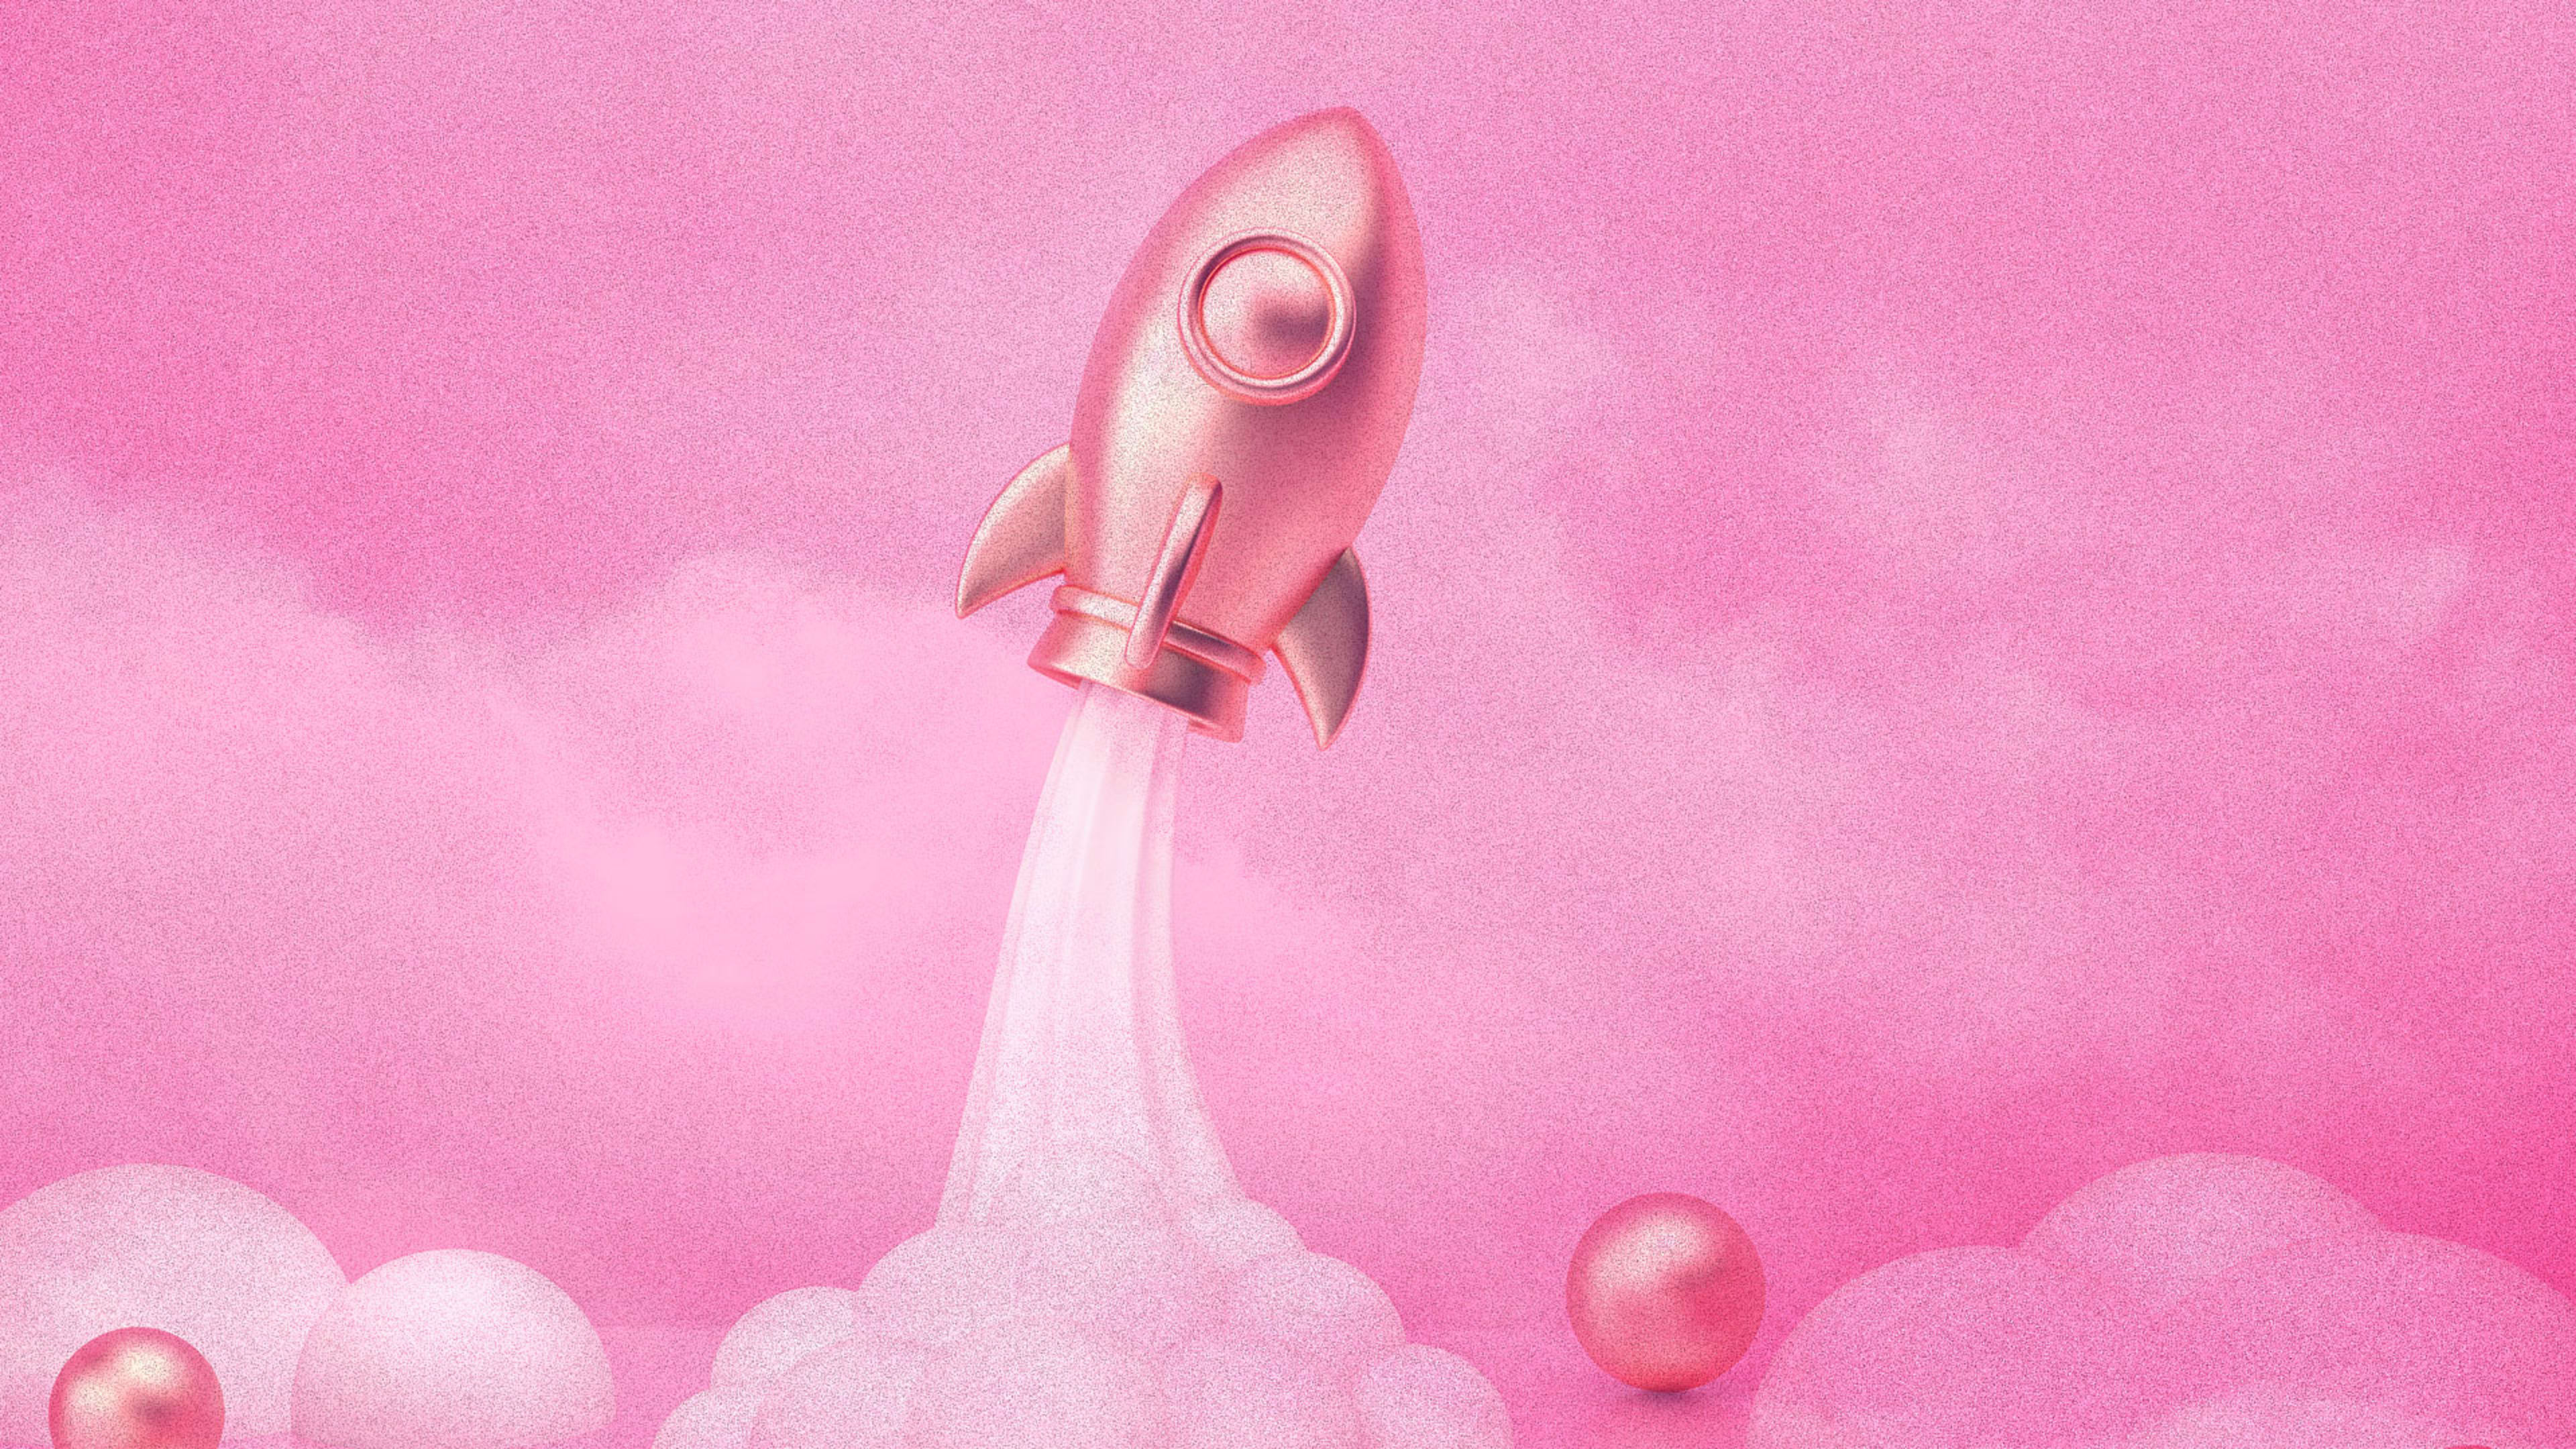 Mattel broadens its horizons with SpaceX partnership for new rocket ship toys